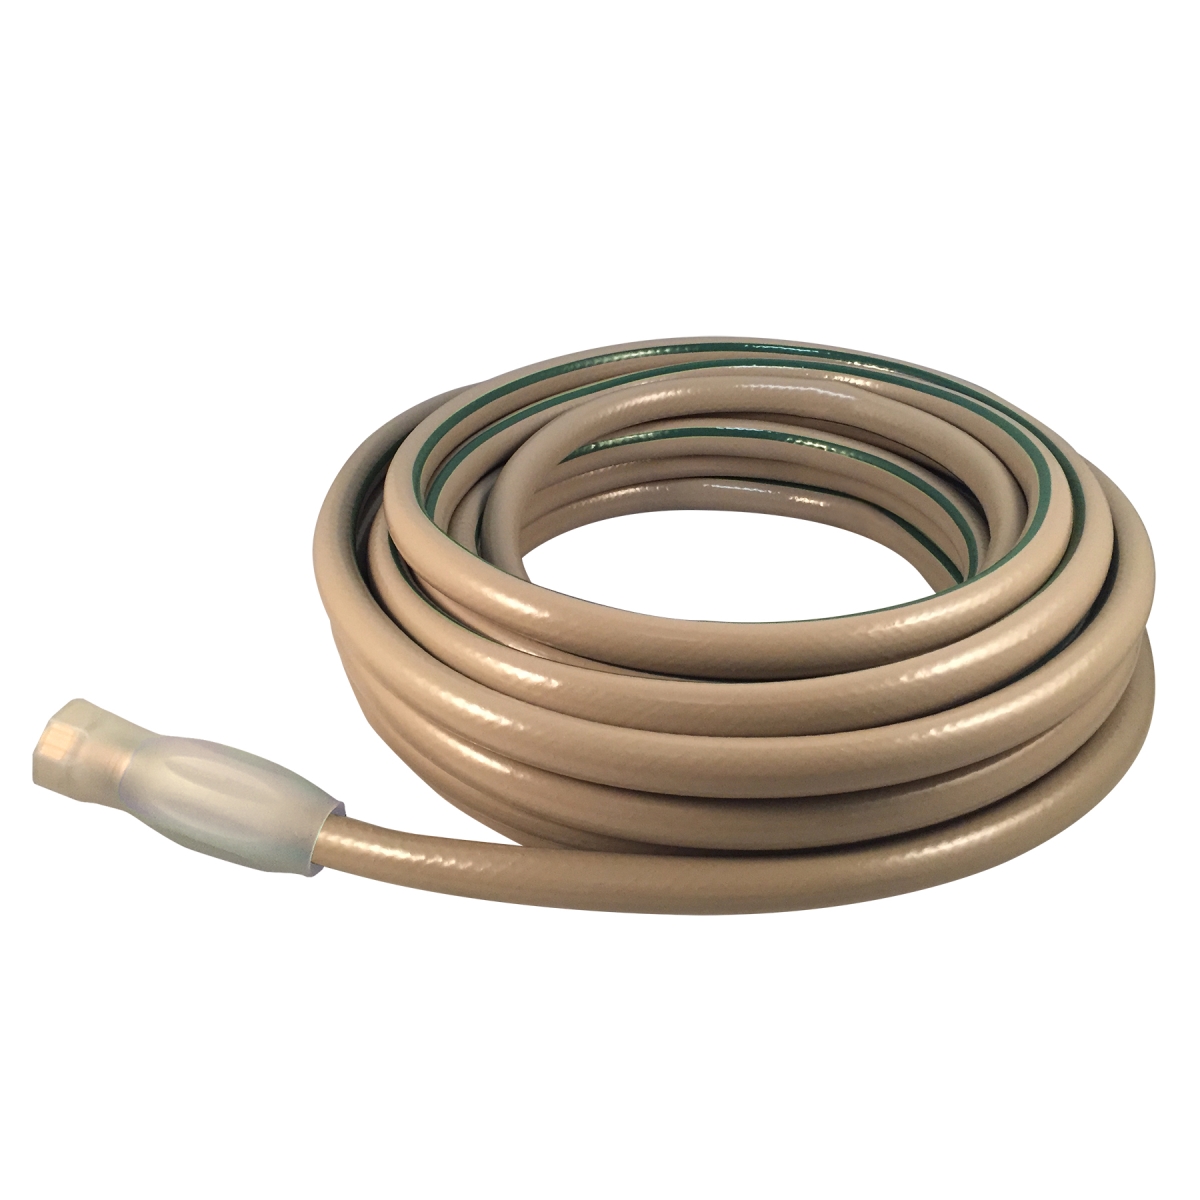 Picture of Flexon Hose FAW5825 0.62 in. x 25 ft. 4 Ply Medium Duty Hose